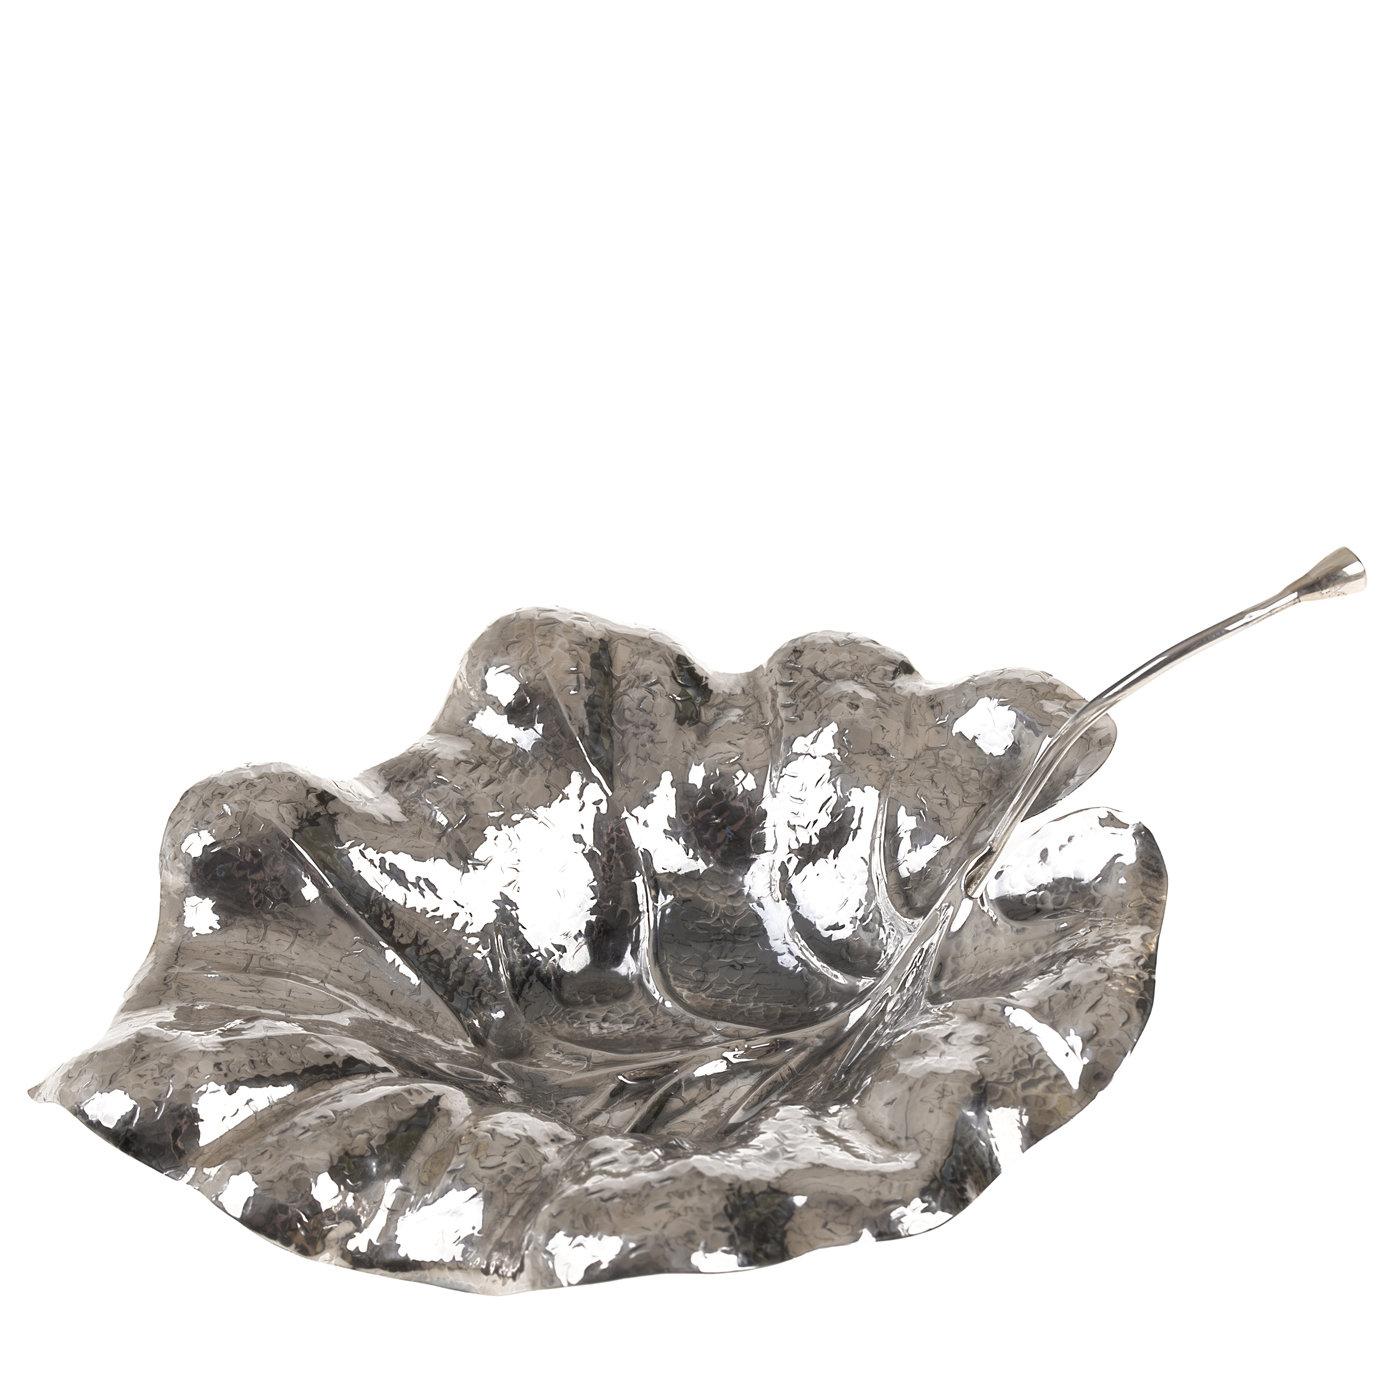 Deft craftsmanship renders this piece magnificently life-like. Crafted from sterling silver by Italian artisan house Brothers Lisi, embossed and engraved by hand, the ornate leaf has a hollowed center in which bonbons and other items can be placed.